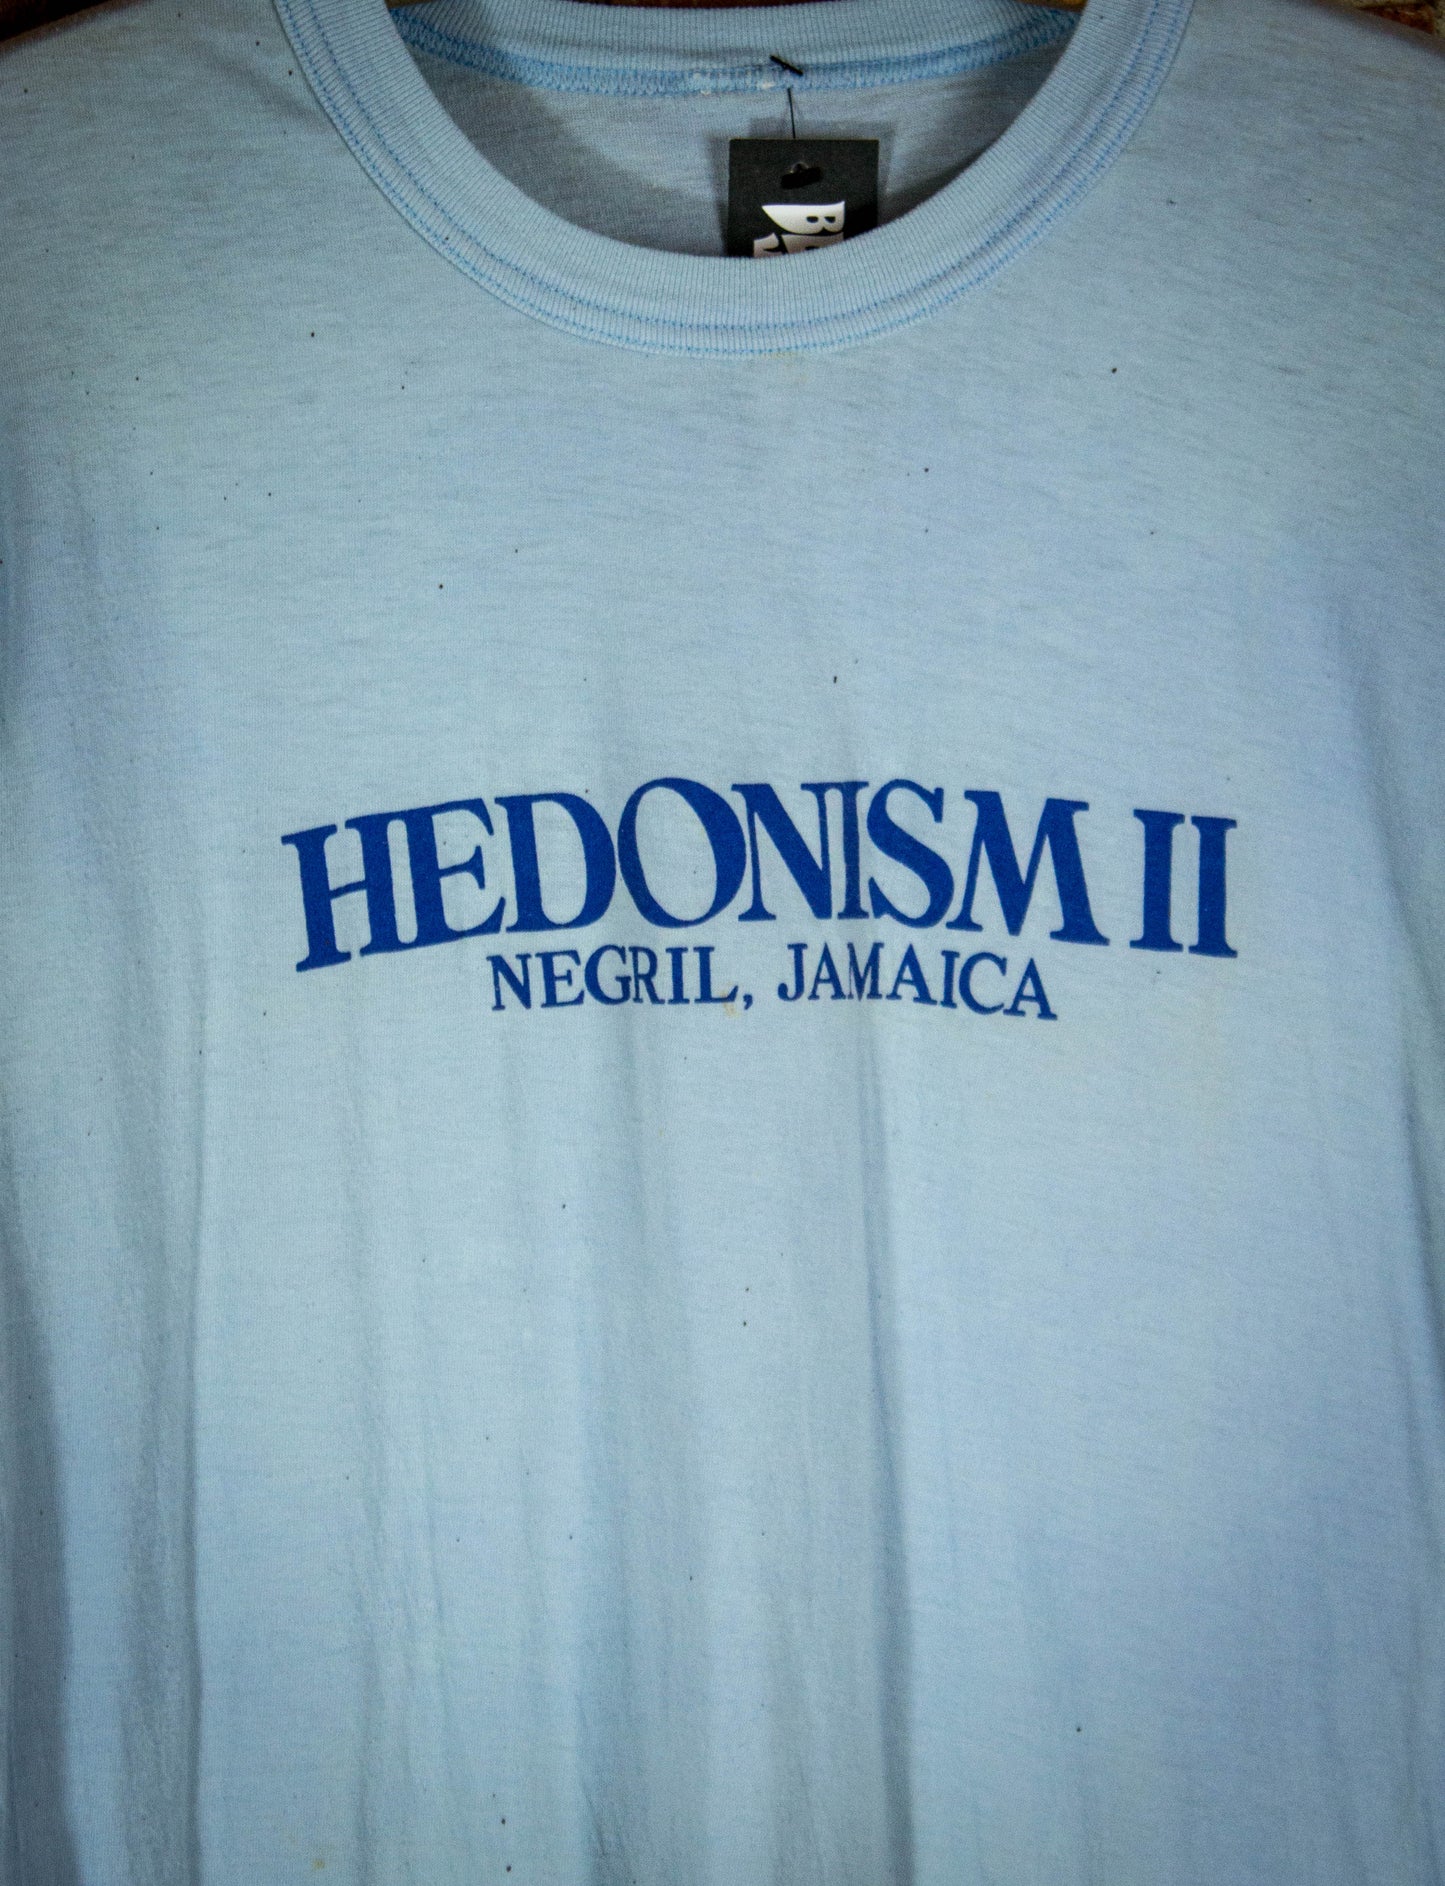 Vintage 80s Hedonism II Negril Jamaica Blue Graphic T Shirt Large